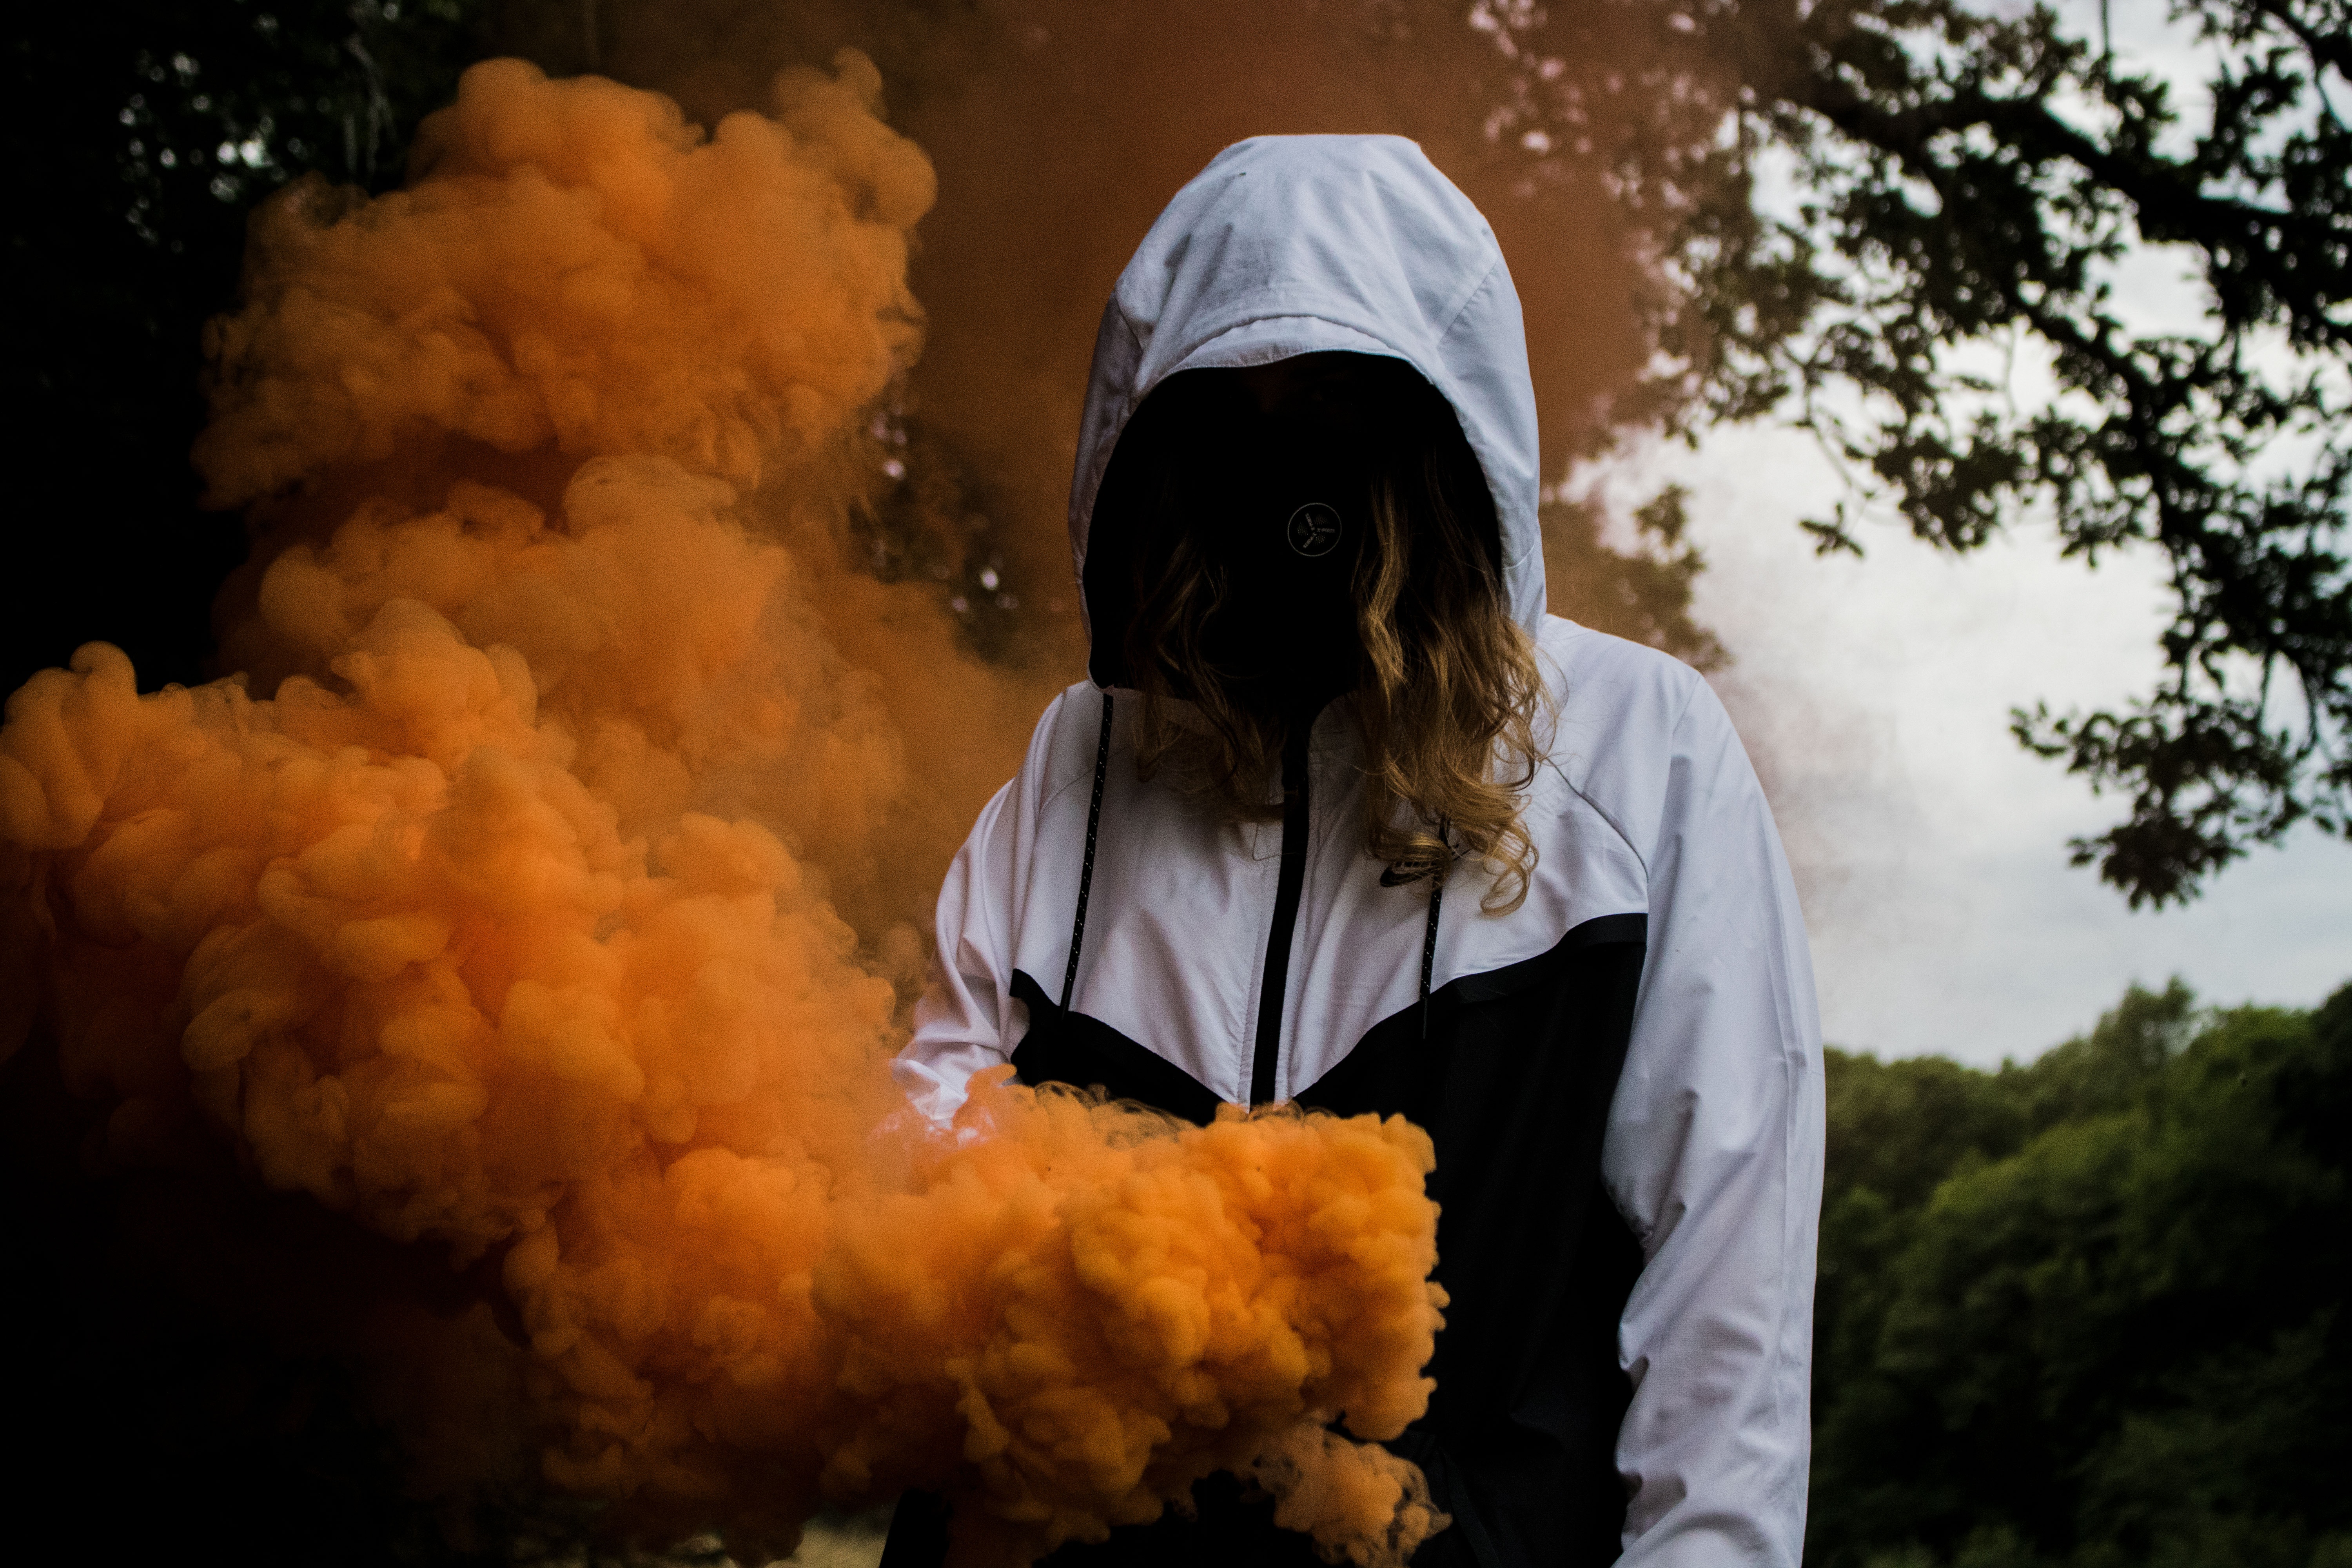 A person wearing a hooded jacket, surrounded by smoke